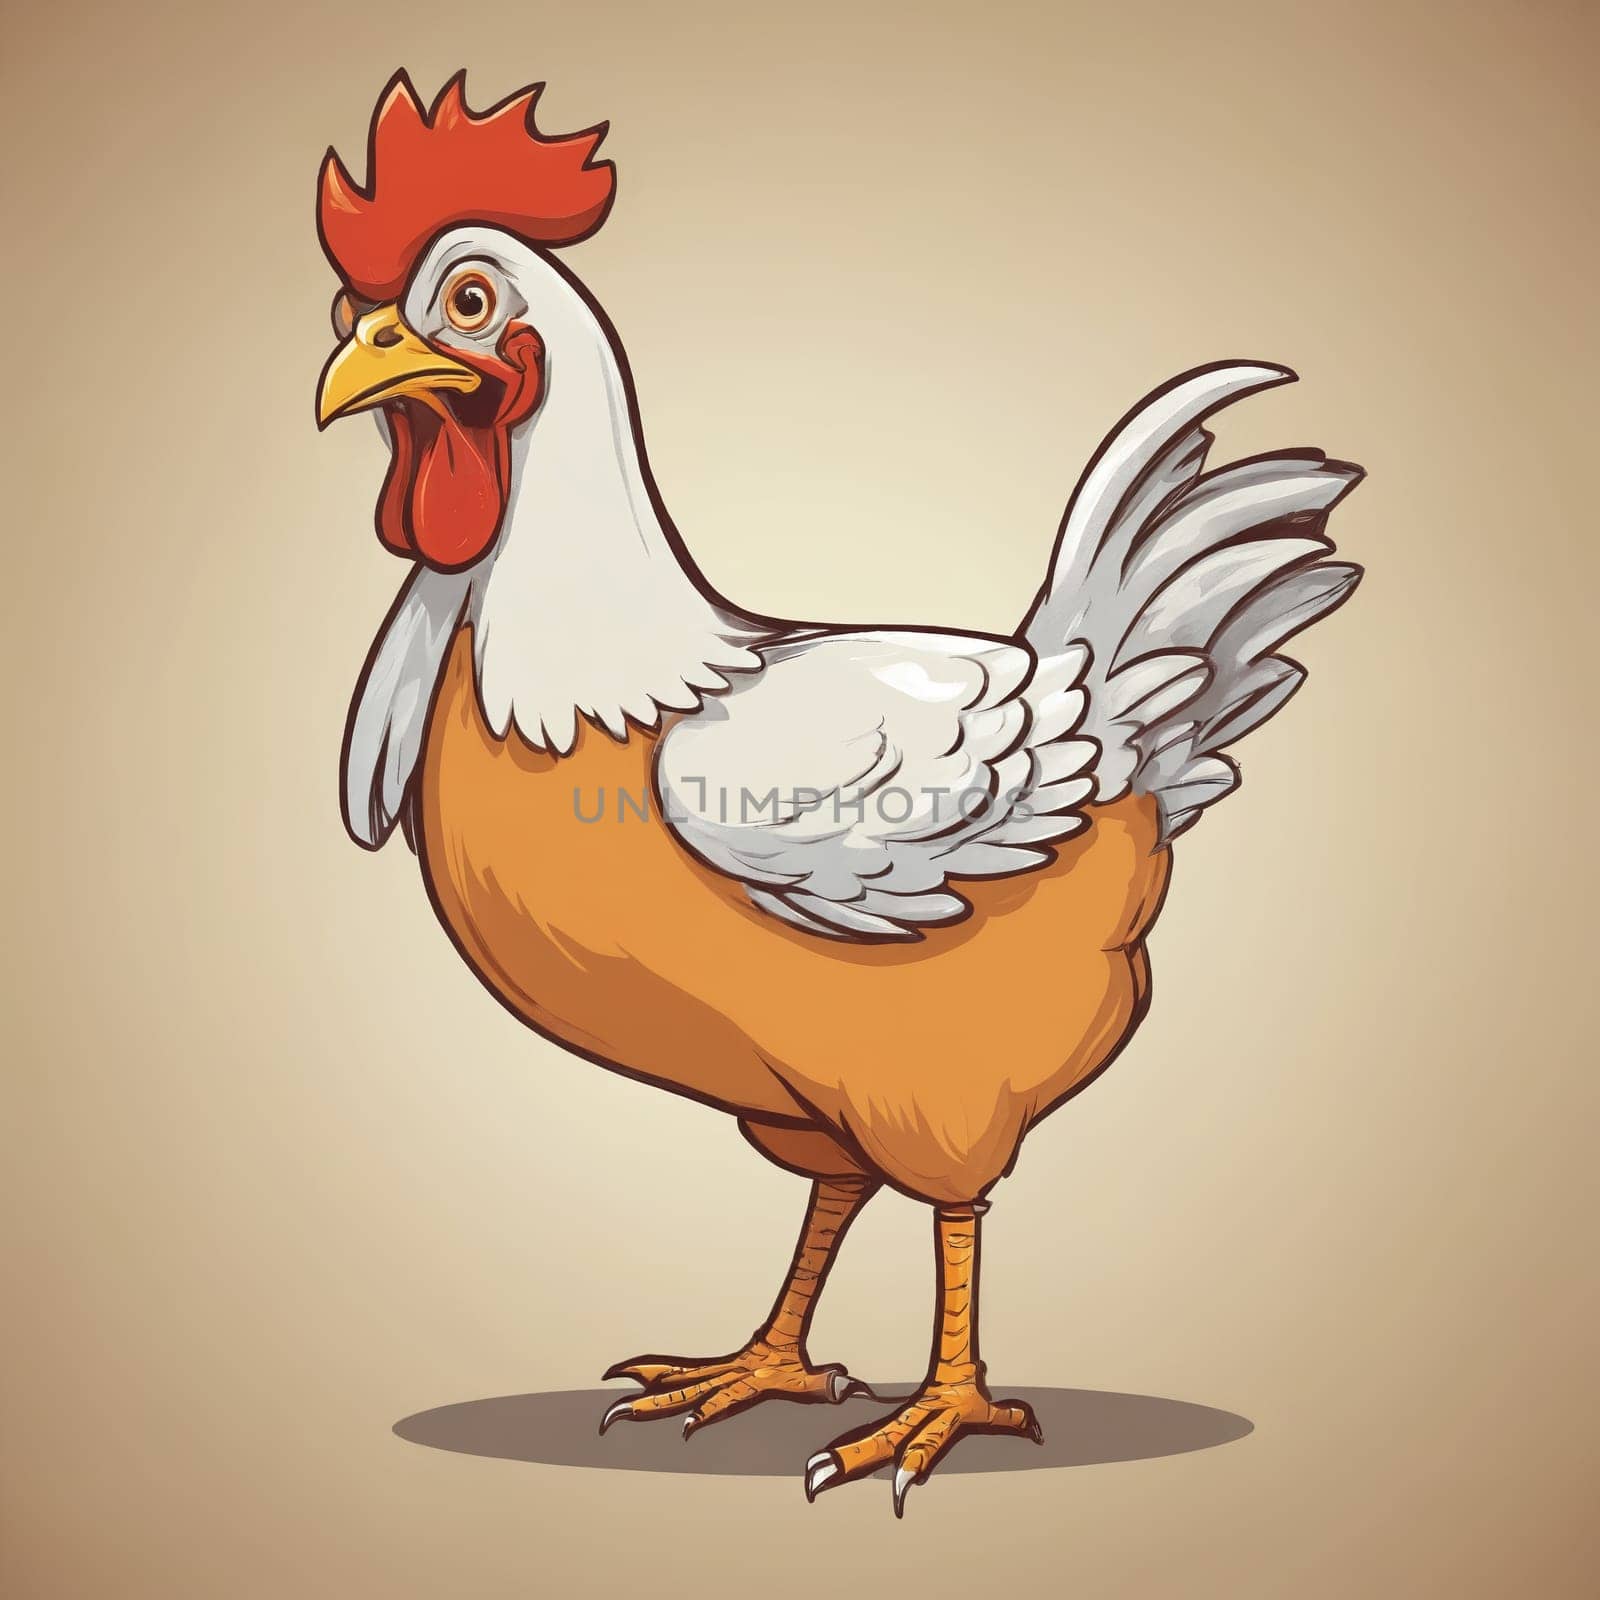 The joy of farm life encapsulated in a bright and cheerful chicken cartoon.